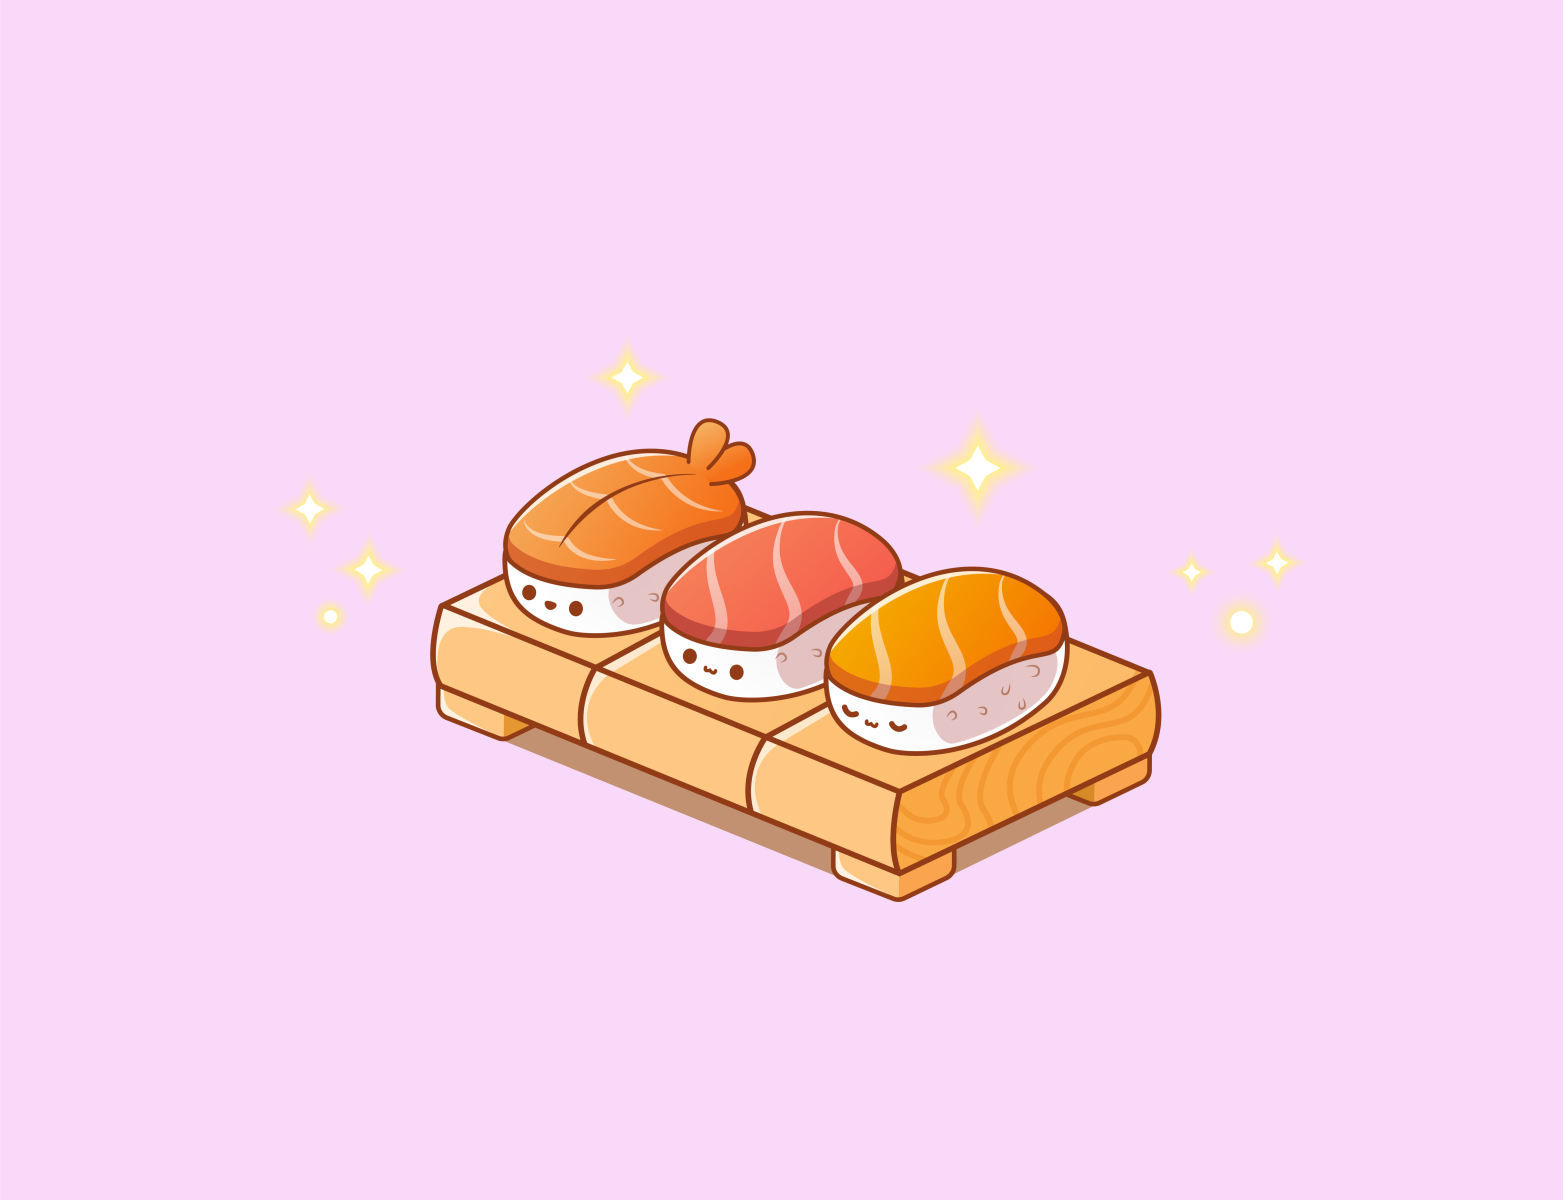 Cute sushi by Qubox on Dribbble